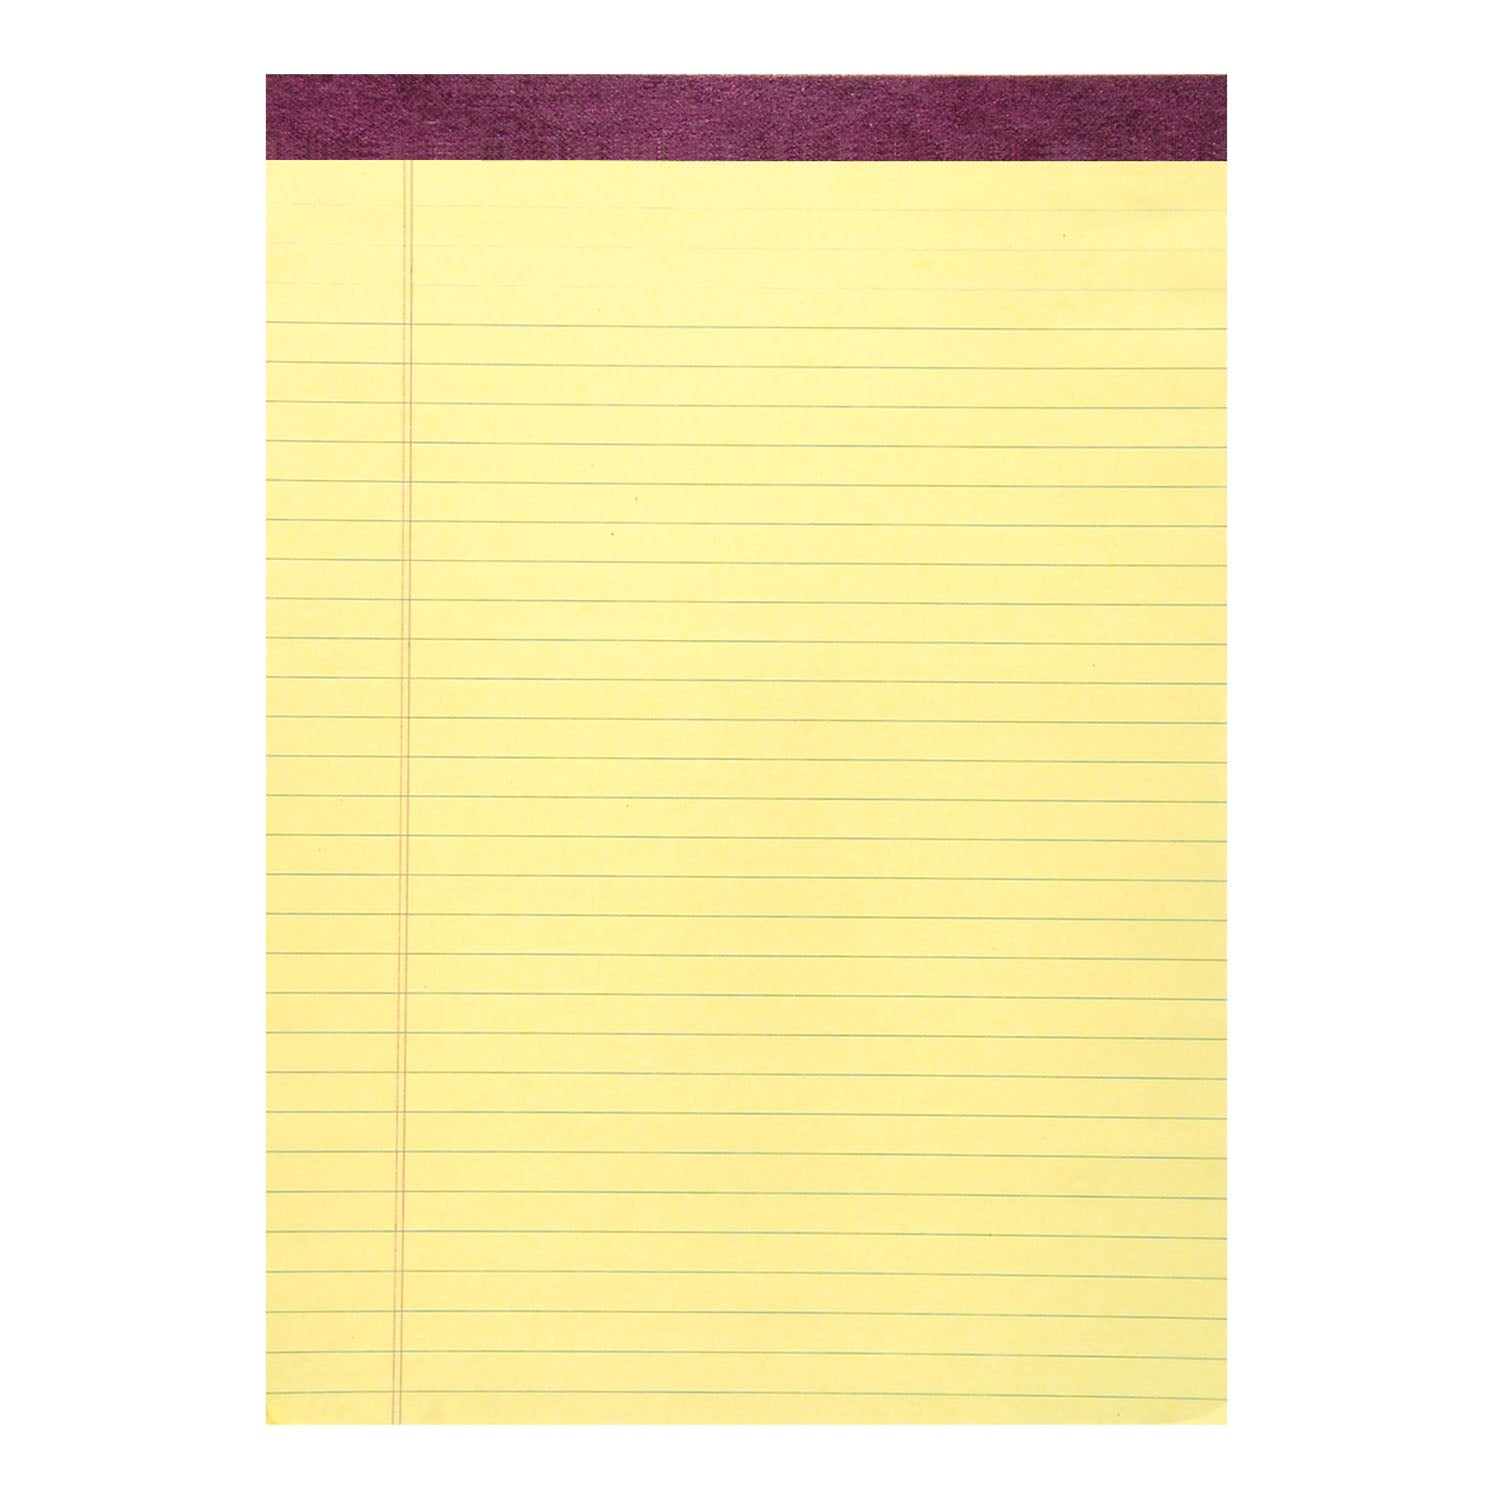 Legal Pad, Standard, Canary, Pack of 12 - A1 School Supplies